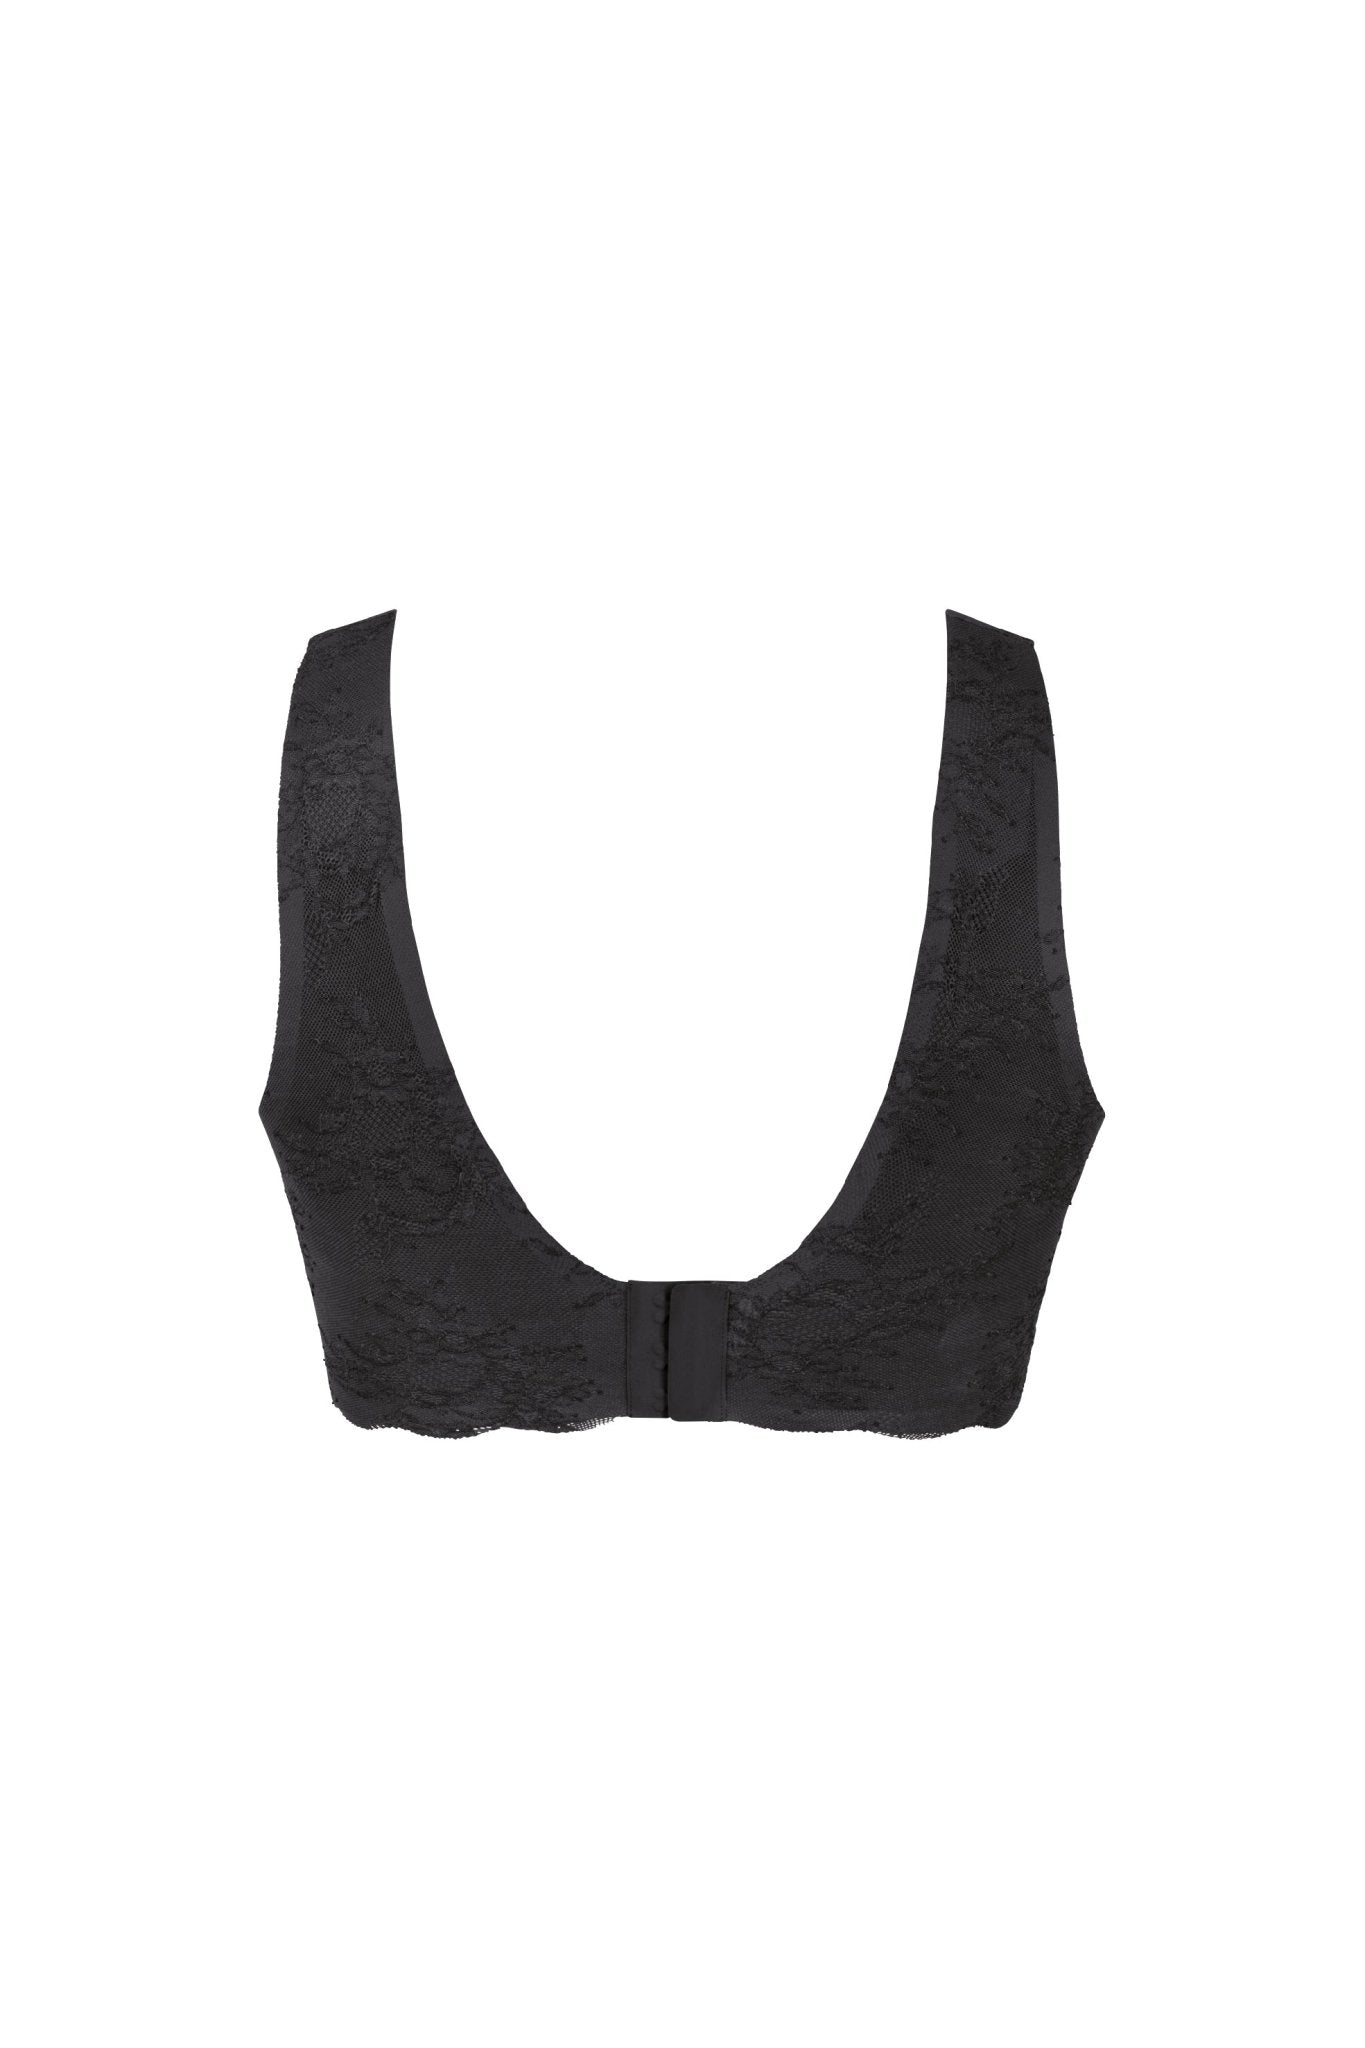 Essentials Lace Bralette - Pinned Up Bra Lounge